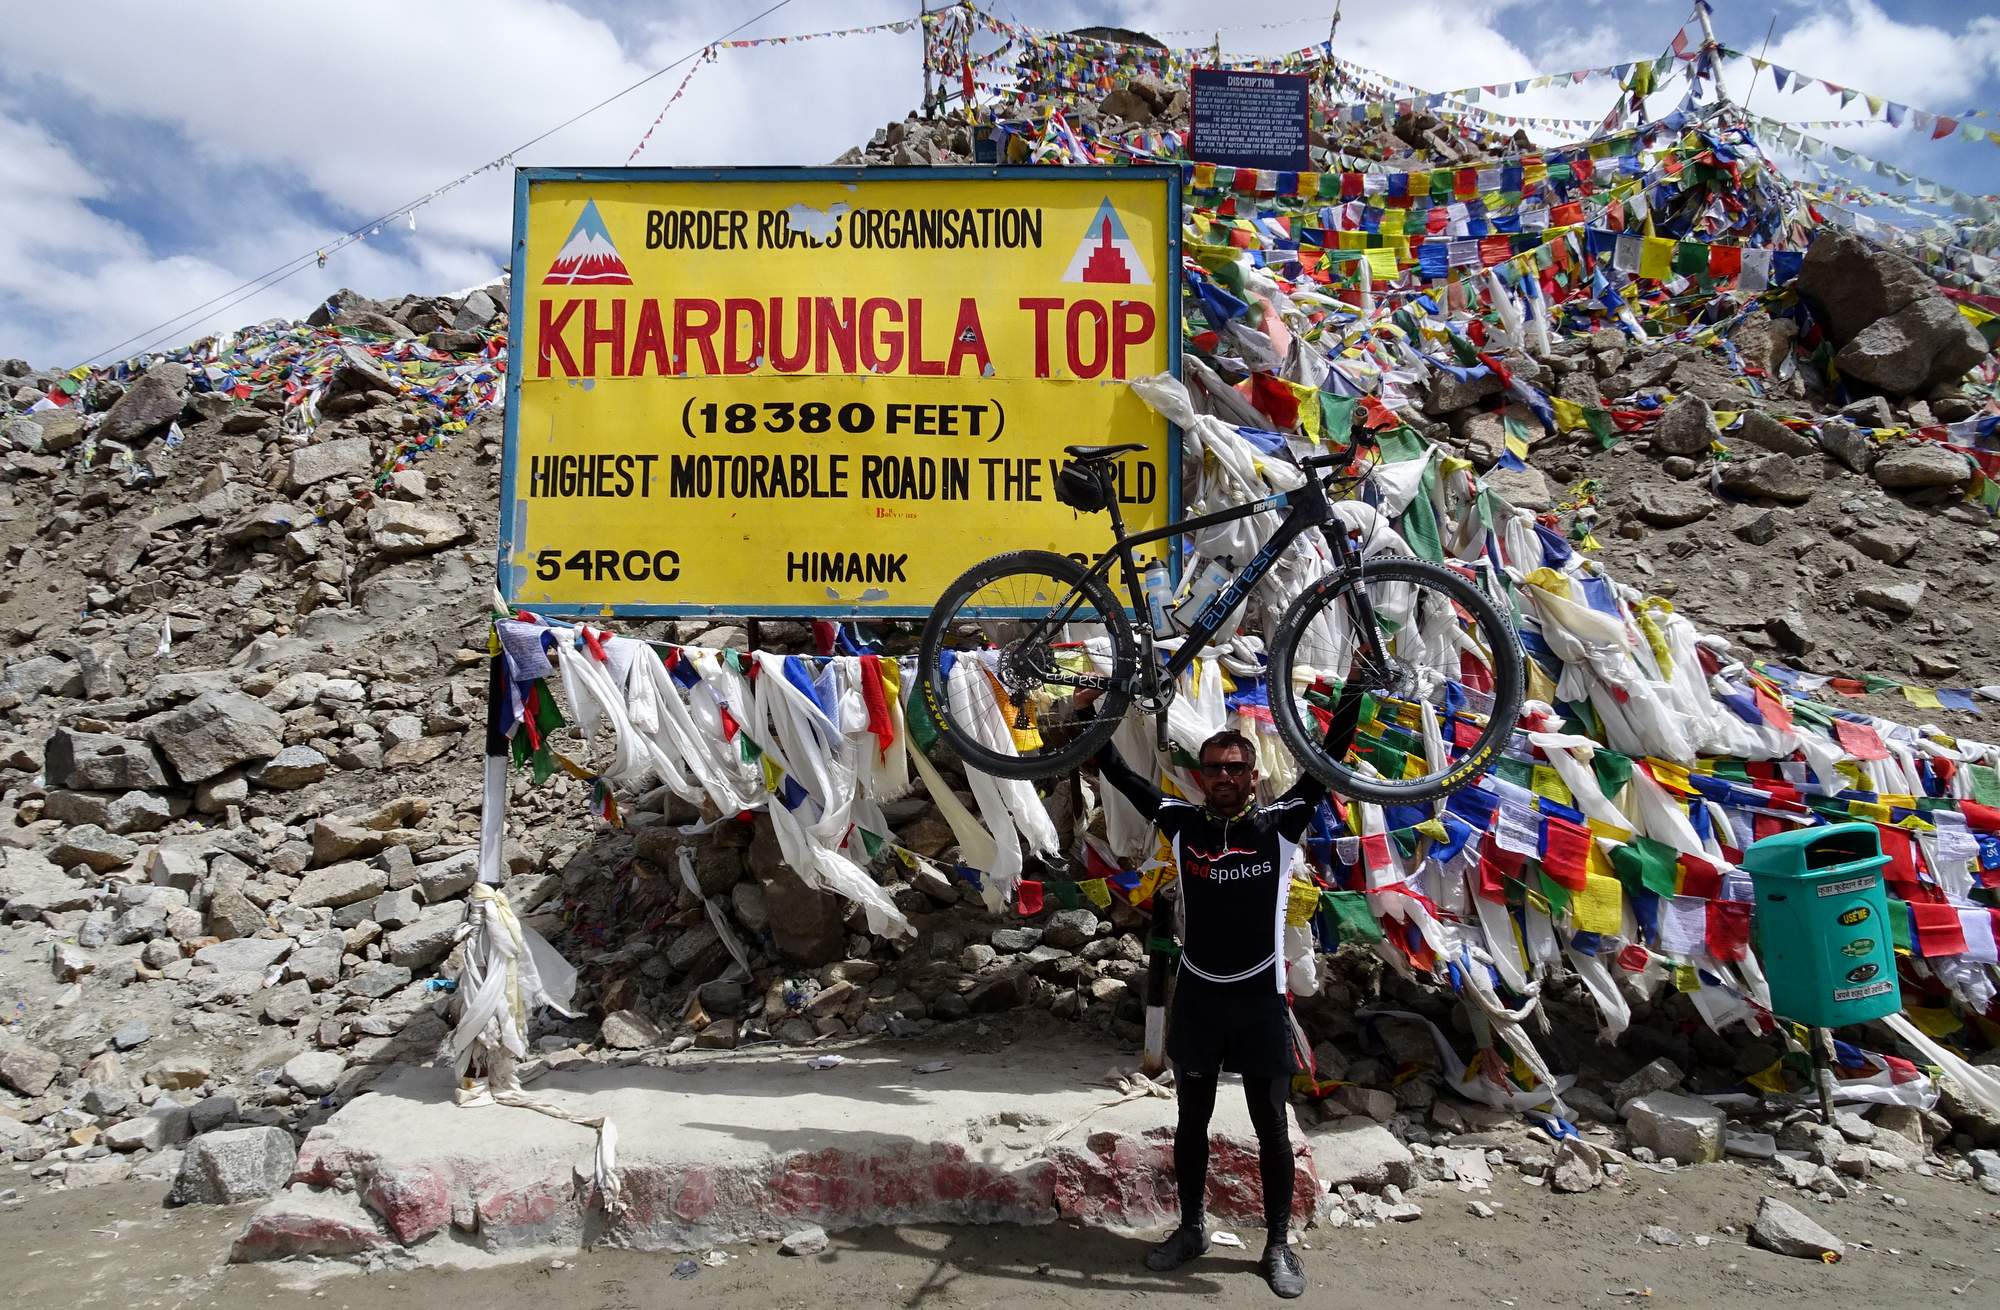 Photos from our India : Spiti - Ladakh Cycling Holiday